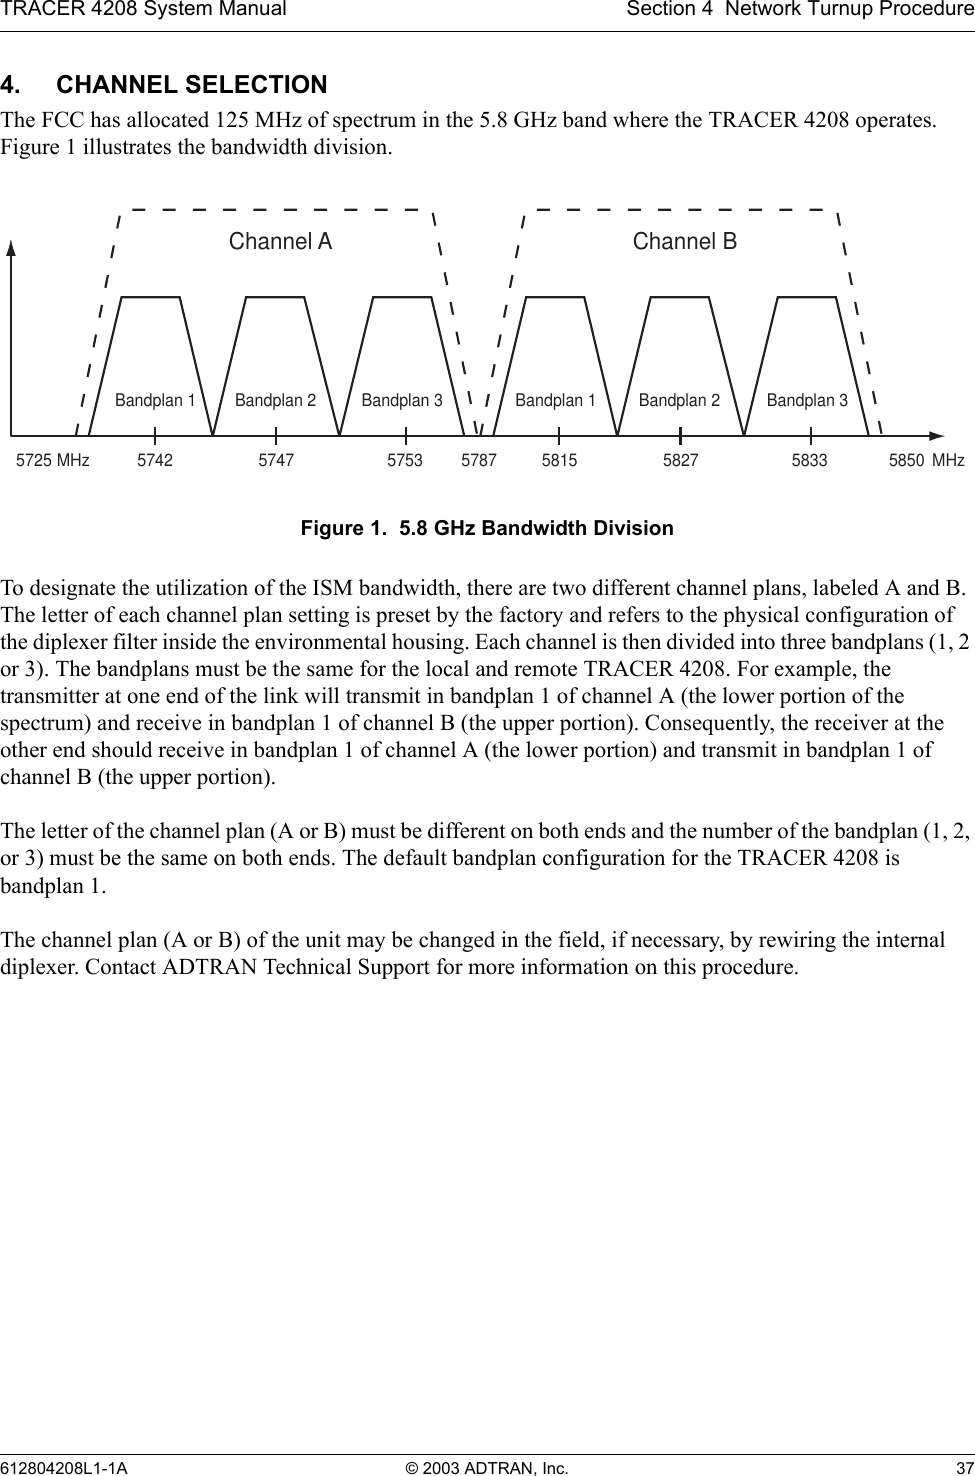 TRACER 4208 System Manual Section 4  Network Turnup Procedure612804208L1-1A © 2003 ADTRAN, Inc. 374. CHANNEL SELECTIONThe FCC has allocated 125 MHz of spectrum in the 5.8 GHz band where the TRACER 4208 operates. Figure 1 illustrates the bandwidth division. Figure 1.  5.8 GHz Bandwidth DivisionTo designate the utilization of the ISM bandwidth, there are two different channel plans, labeled A and B. The letter of each channel plan setting is preset by the factory and refers to the physical configuration of the diplexer filter inside the environmental housing. Each channel is then divided into three bandplans (1, 2 or 3). The bandplans must be the same for the local and remote TRACER 4208. For example, the transmitter at one end of the link will transmit in bandplan 1 of channel A (the lower portion of the spectrum) and receive in bandplan 1 of channel B (the upper portion). Consequently, the receiver at the other end should receive in bandplan 1 of channel A (the lower portion) and transmit in bandplan 1 of channel B (the upper portion).The letter of the channel plan (A or B) must be different on both ends and the number of the bandplan (1, 2, or 3) must be the same on both ends. The default bandplan configuration for the TRACER 4208 is bandplan 1.The channel plan (A or B) of the unit may be changed in the field, if necessary, by rewiring the internal diplexer. Contact ADTRAN Technical Support for more information on this procedure.ChannelA57425725 5787 58505747 5753MHz MHzBandplan3Bandplan2Bandplan1ChannelB5815 5827 5833Bandplan3Bandplan2Bandplan1